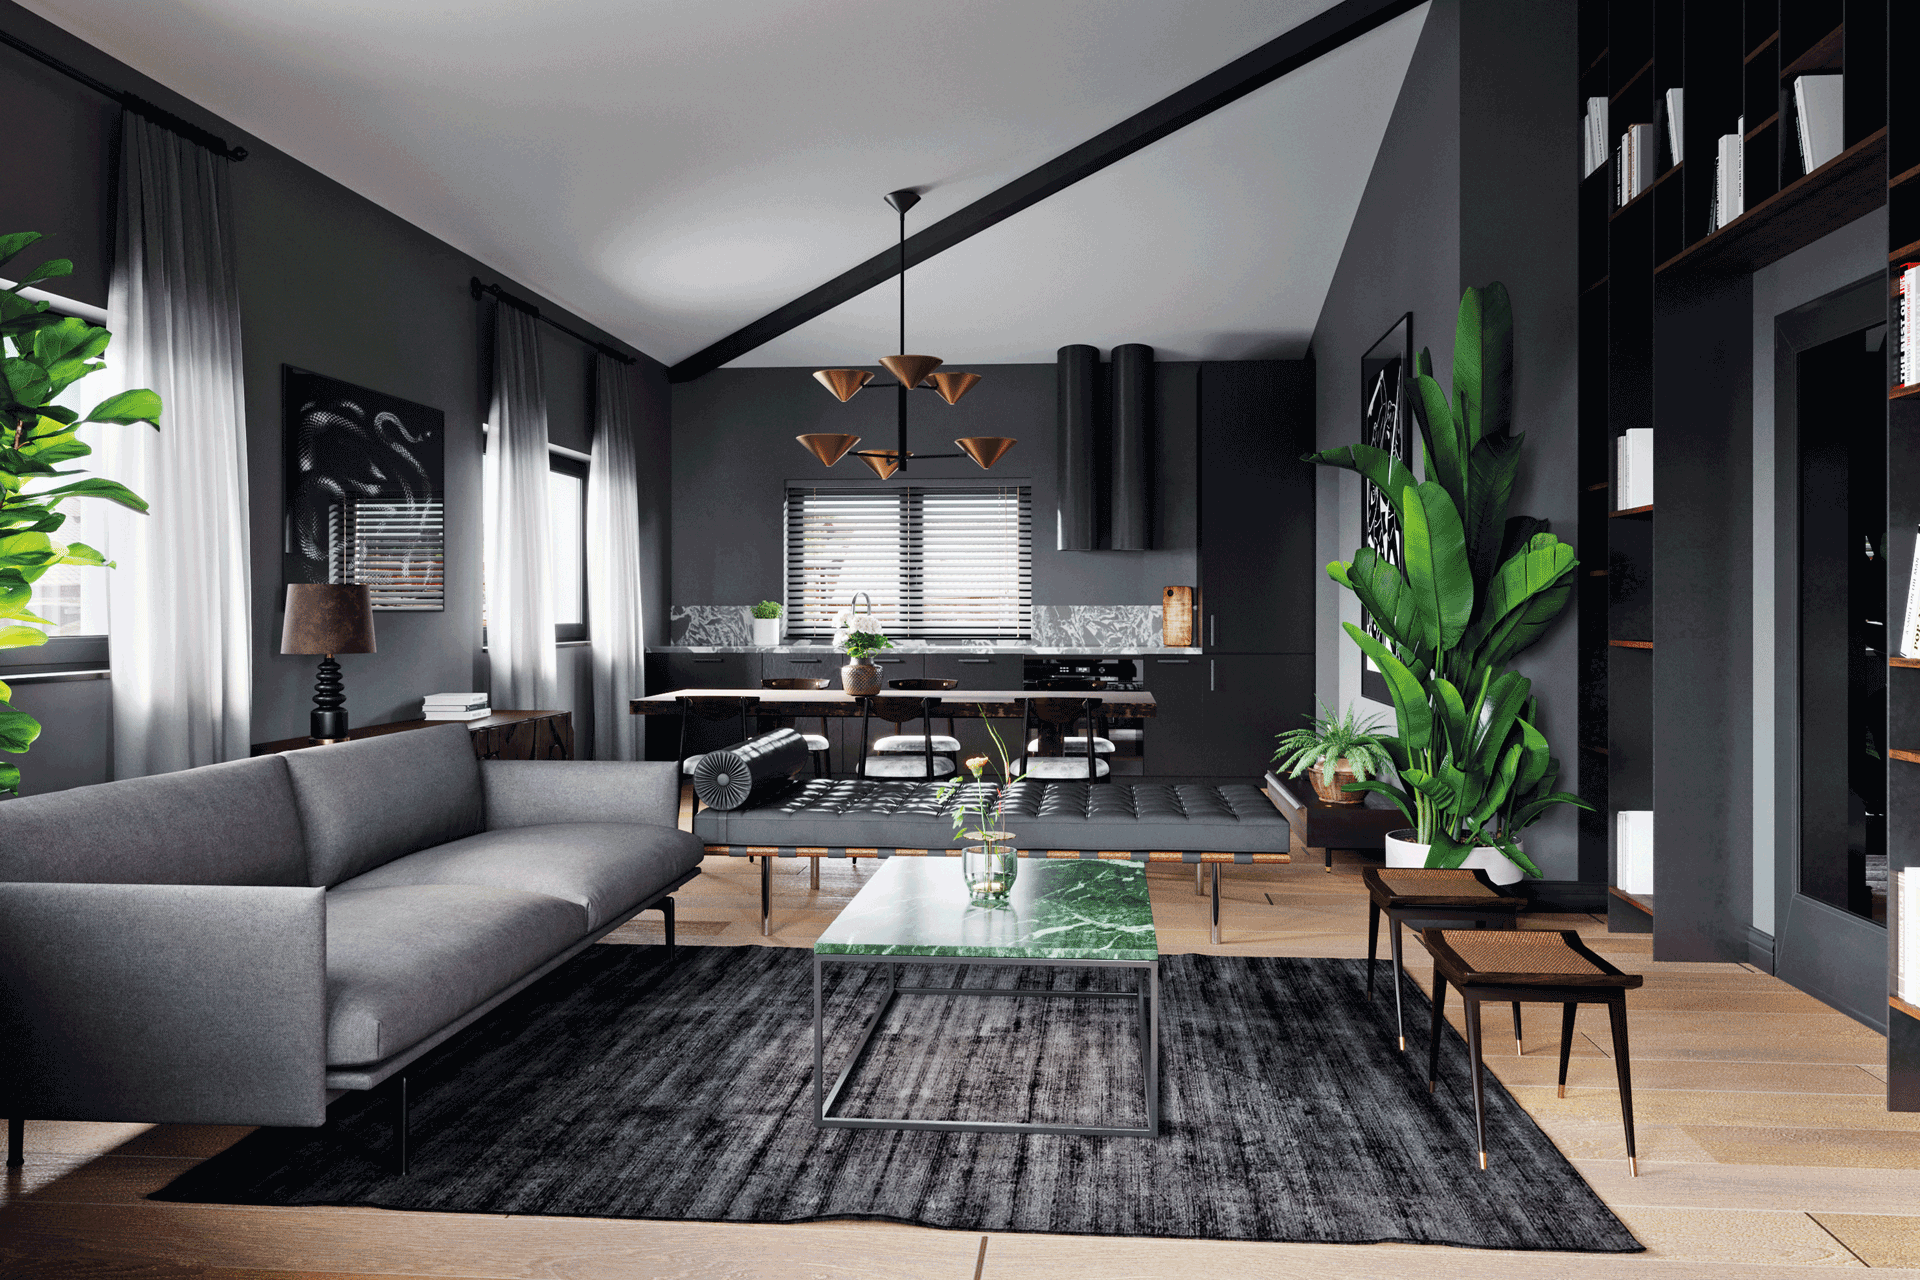 Modern apartment with black walls, black patterned rug and dark grey sofa